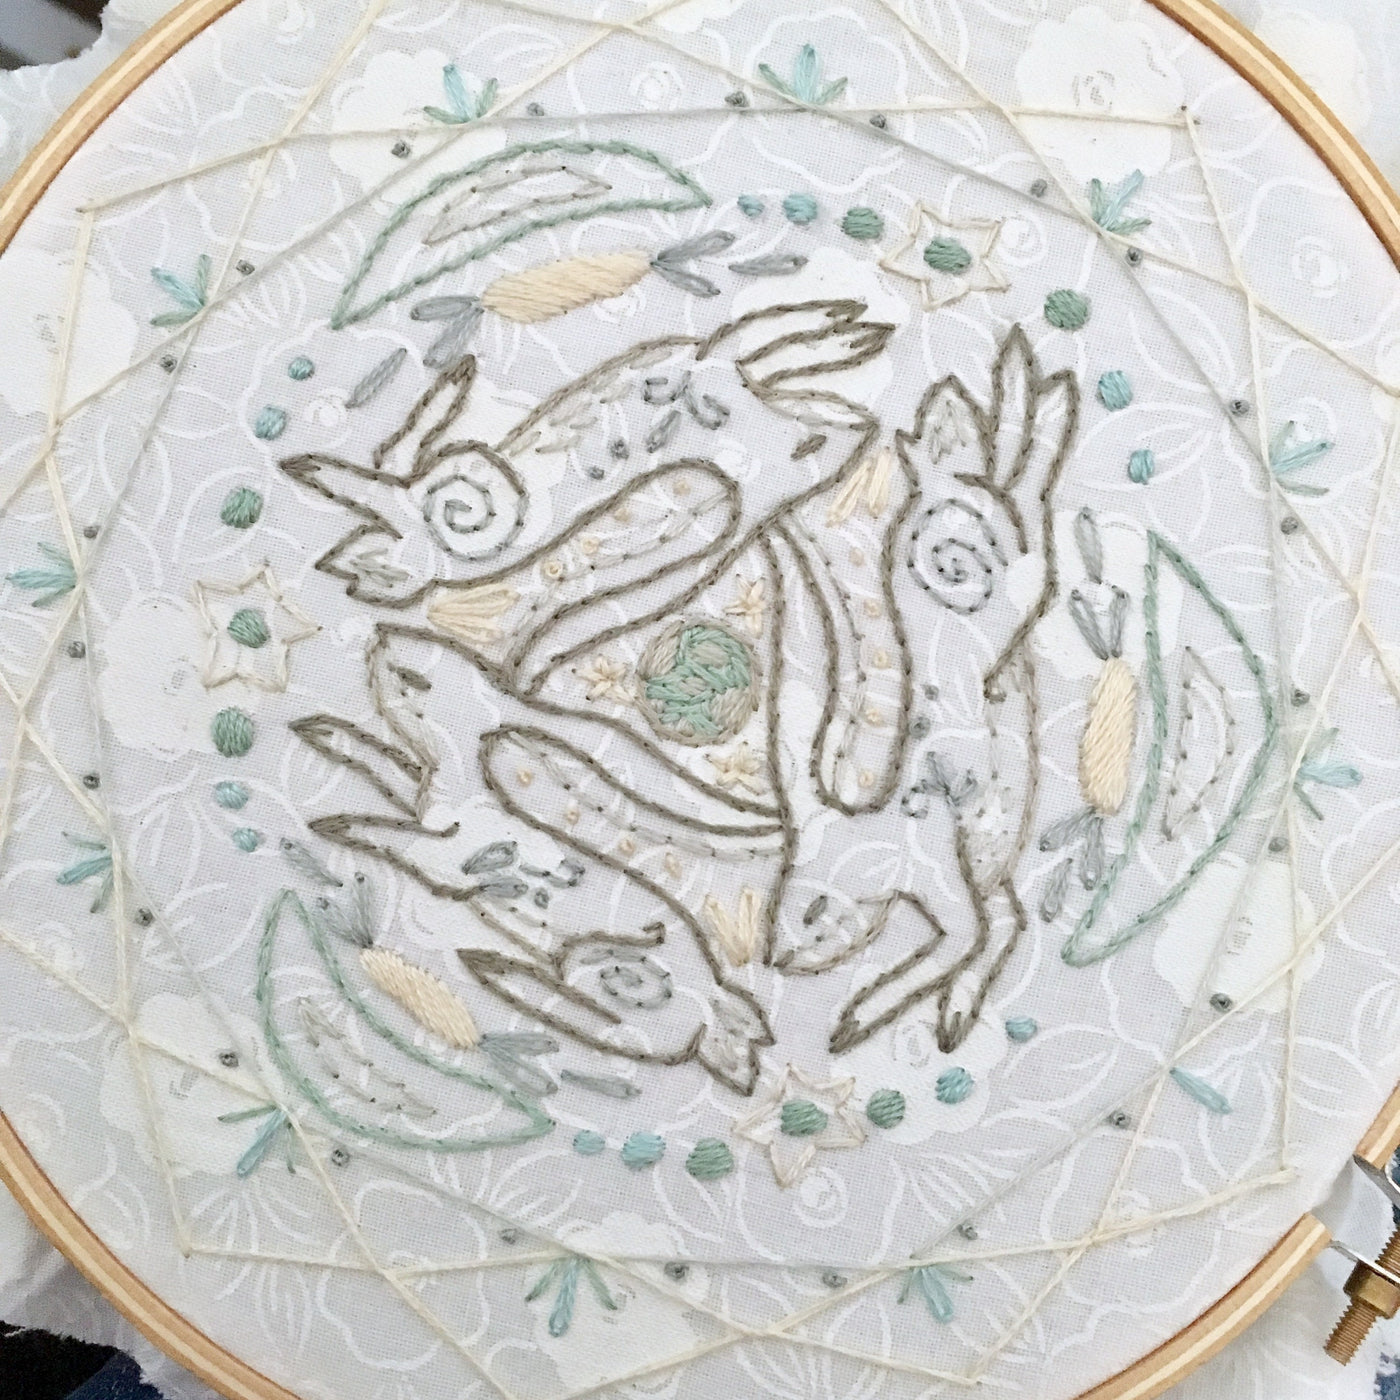 Three Hares Hand Embroidery pattern download, celestial rabbit moon design